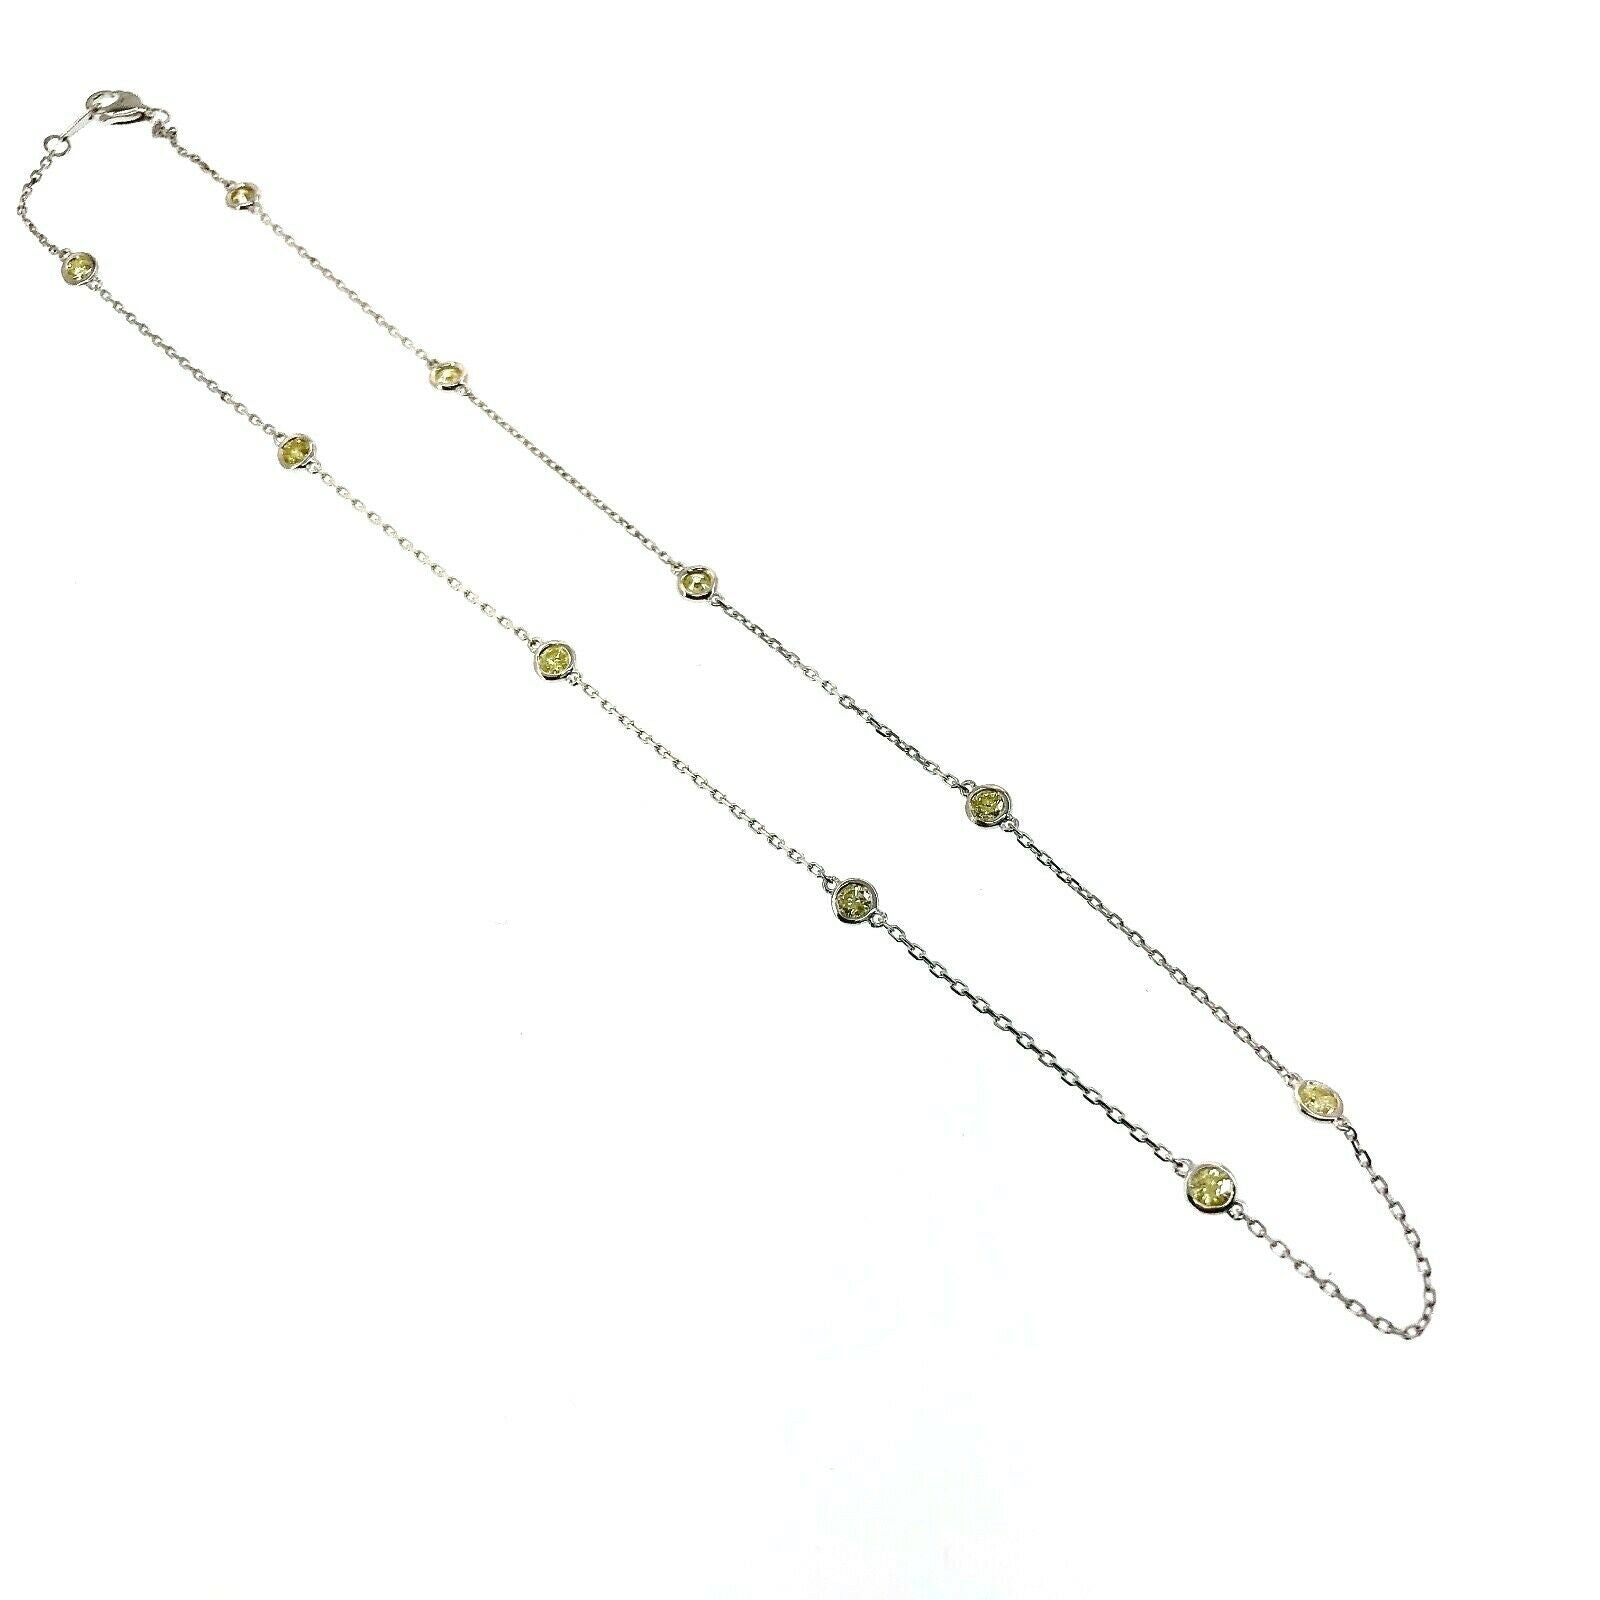 1.10 Carats Hand Assembled Fancy Yellow Diamond by The Yard Necklace Chain